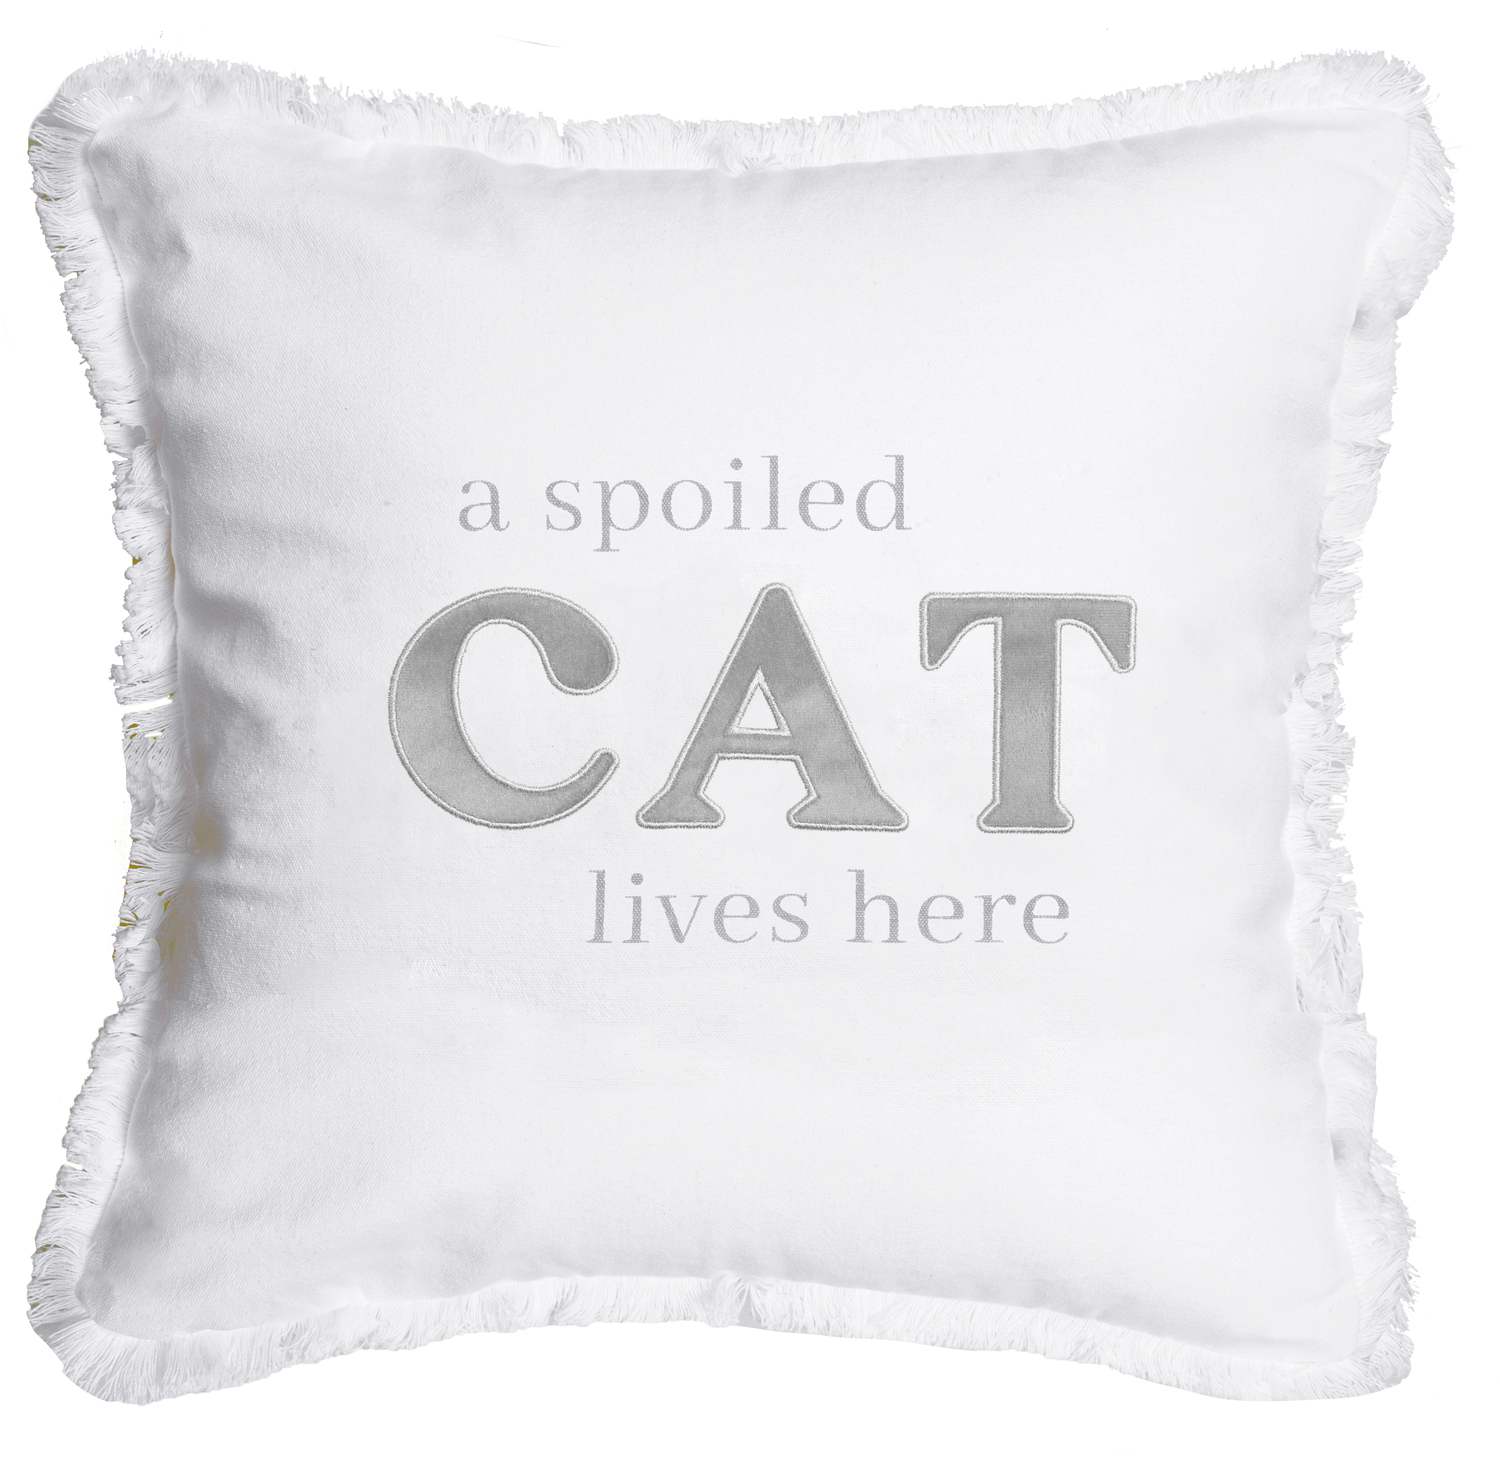 Spoiled Cat by Tossing Words Around - Spoiled Cat - 18" Throw Pillow Cover